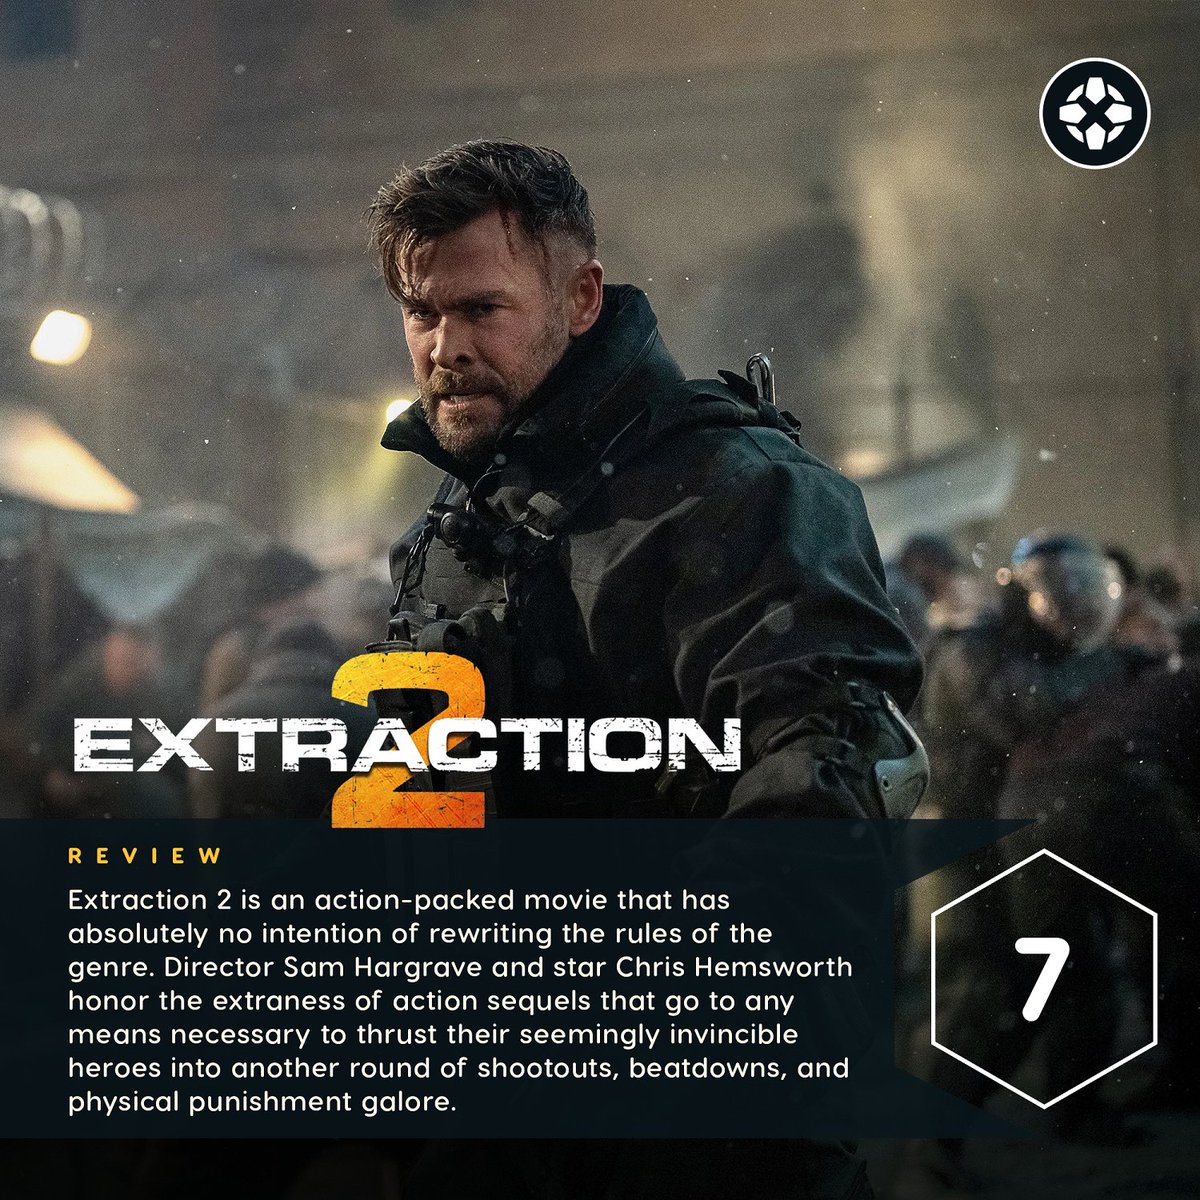 [WATCH] Still Now Here Option's to Downloading or watching Extraction 2 2023 /streaming the full movie online for free. 

📽️/Streaming/ Link: @E2movielink

Extraction 2 full/movie link
you need to know about Extraction 2
#Extraction2 #Extraction